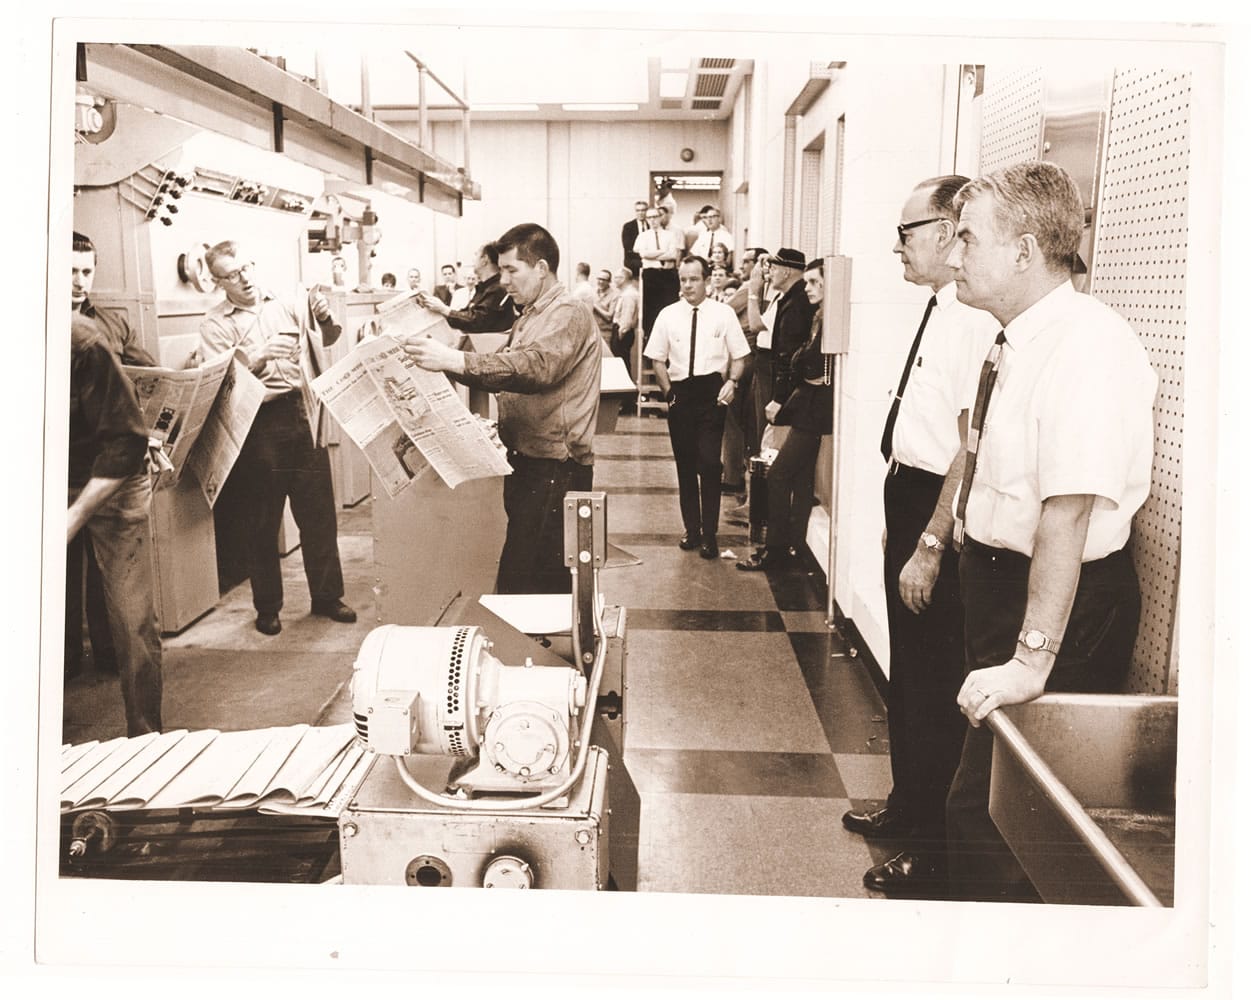 With pressmen and a crowd, Don Campbell, Morrie Shore and Jack Campbell watch the first run on the new Goss Metro Press.